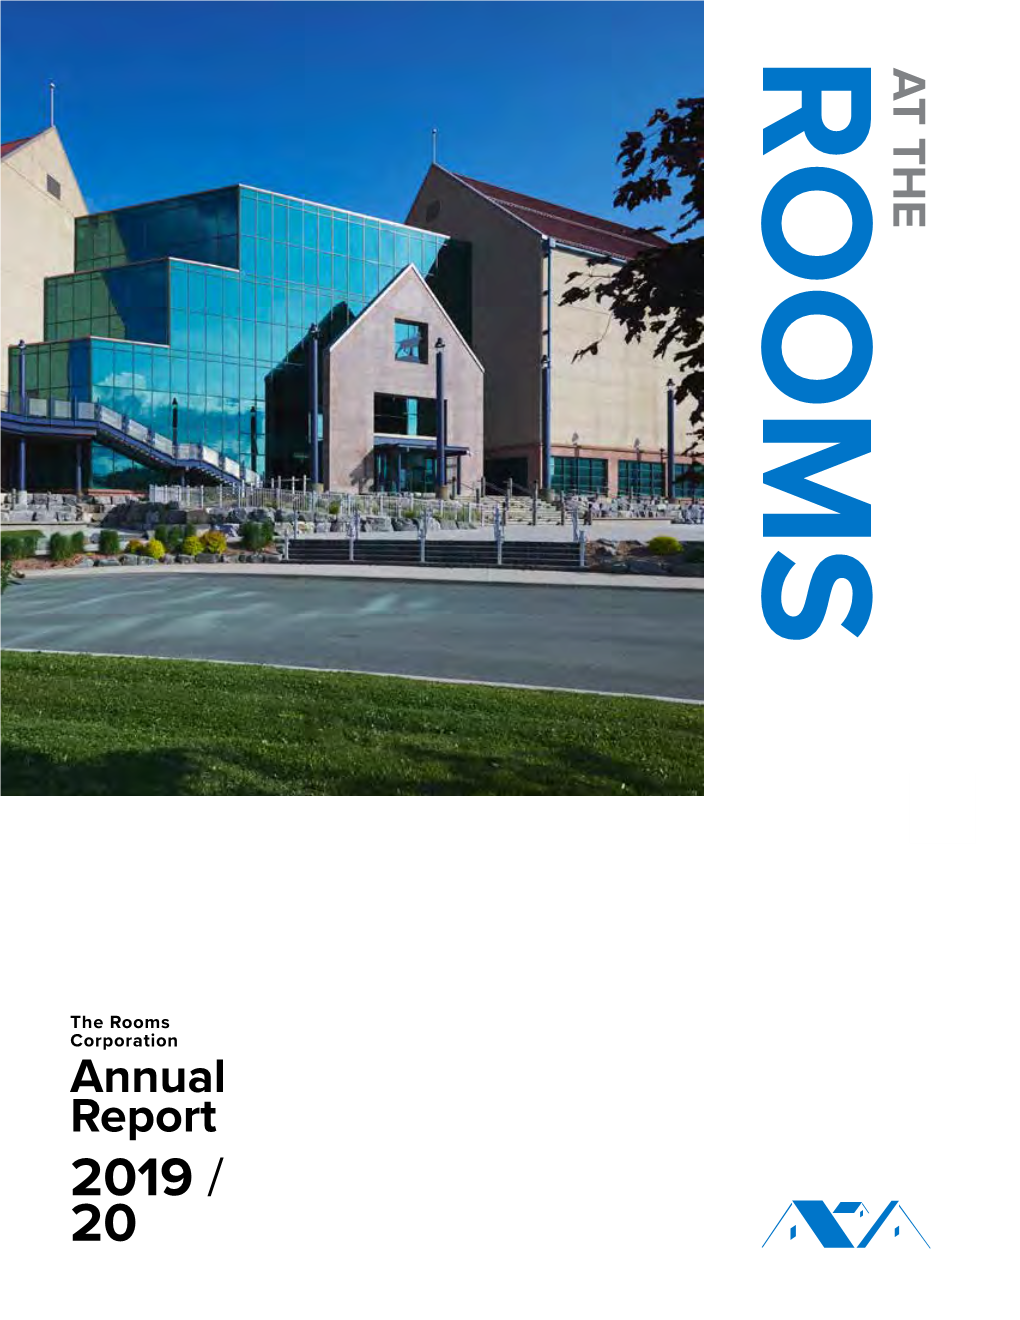 The Rooms Annual Report 2019-20